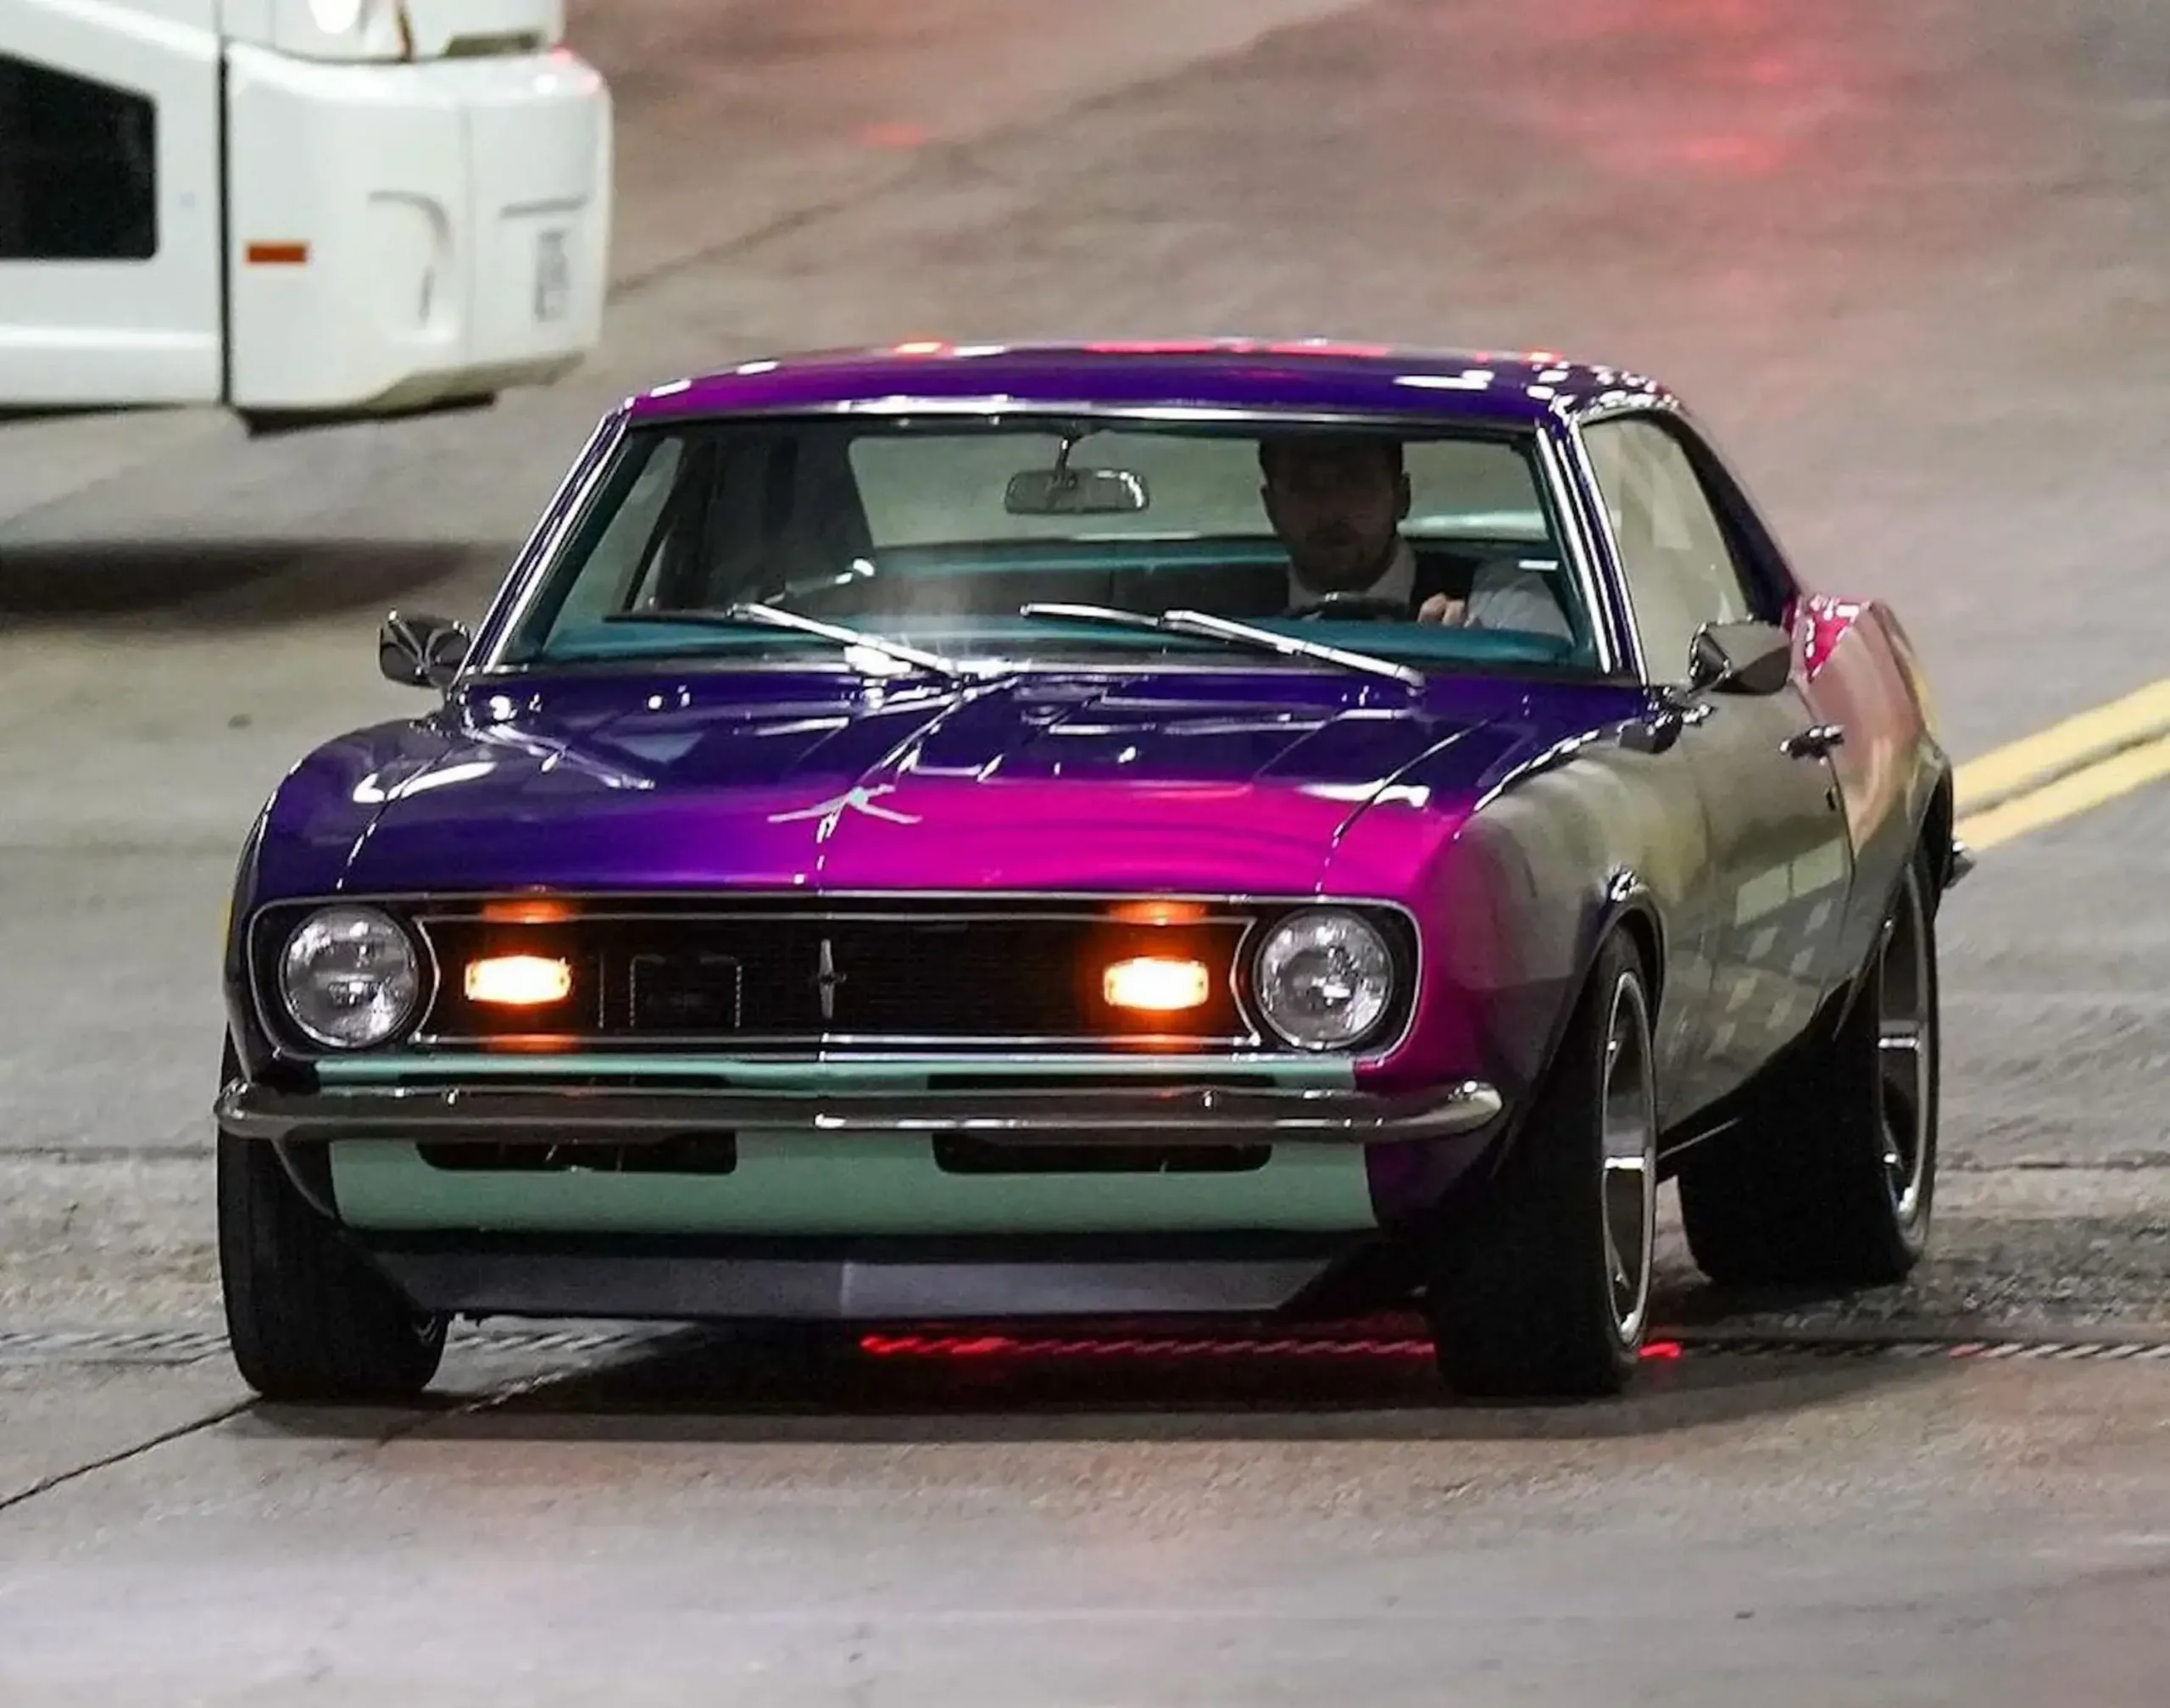 Nba Star Luka Doncic Shows His 1968 Chevy Camaro Wrapped In Pink And Purple Not His Idea 4 (1)